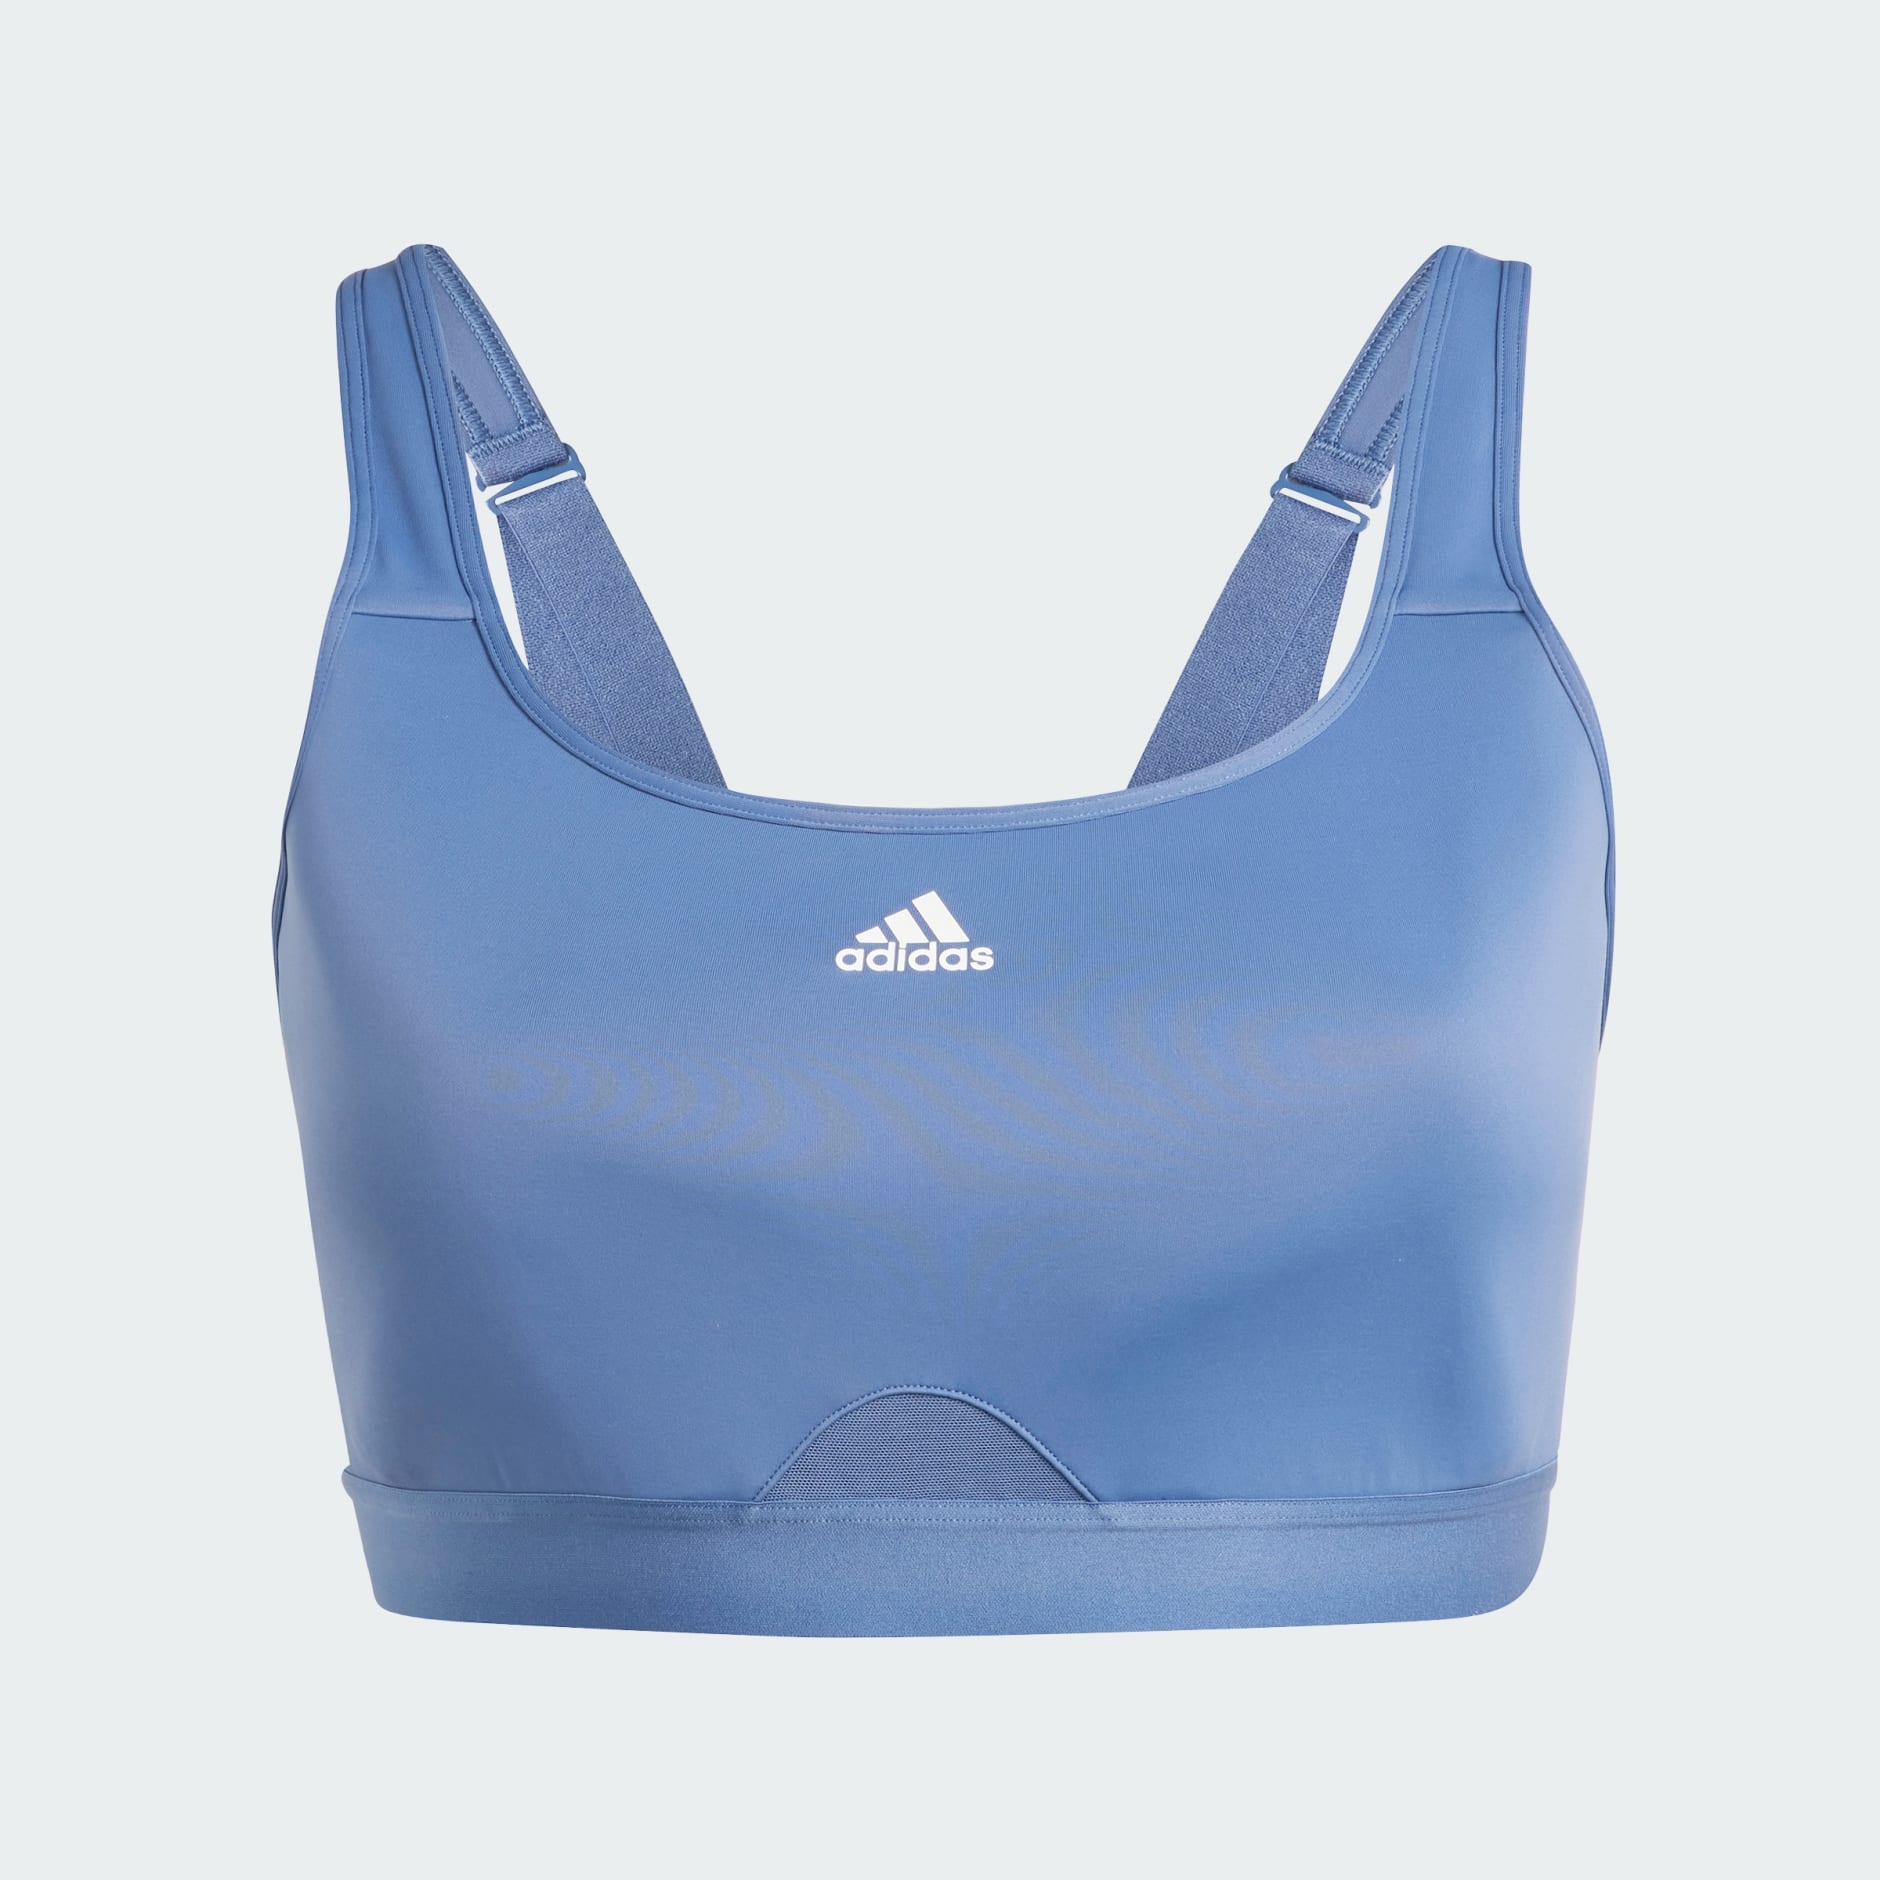 Women's Clothing - adidas TLRD Move Training High-Support Bra (Plus Size) -  Blue